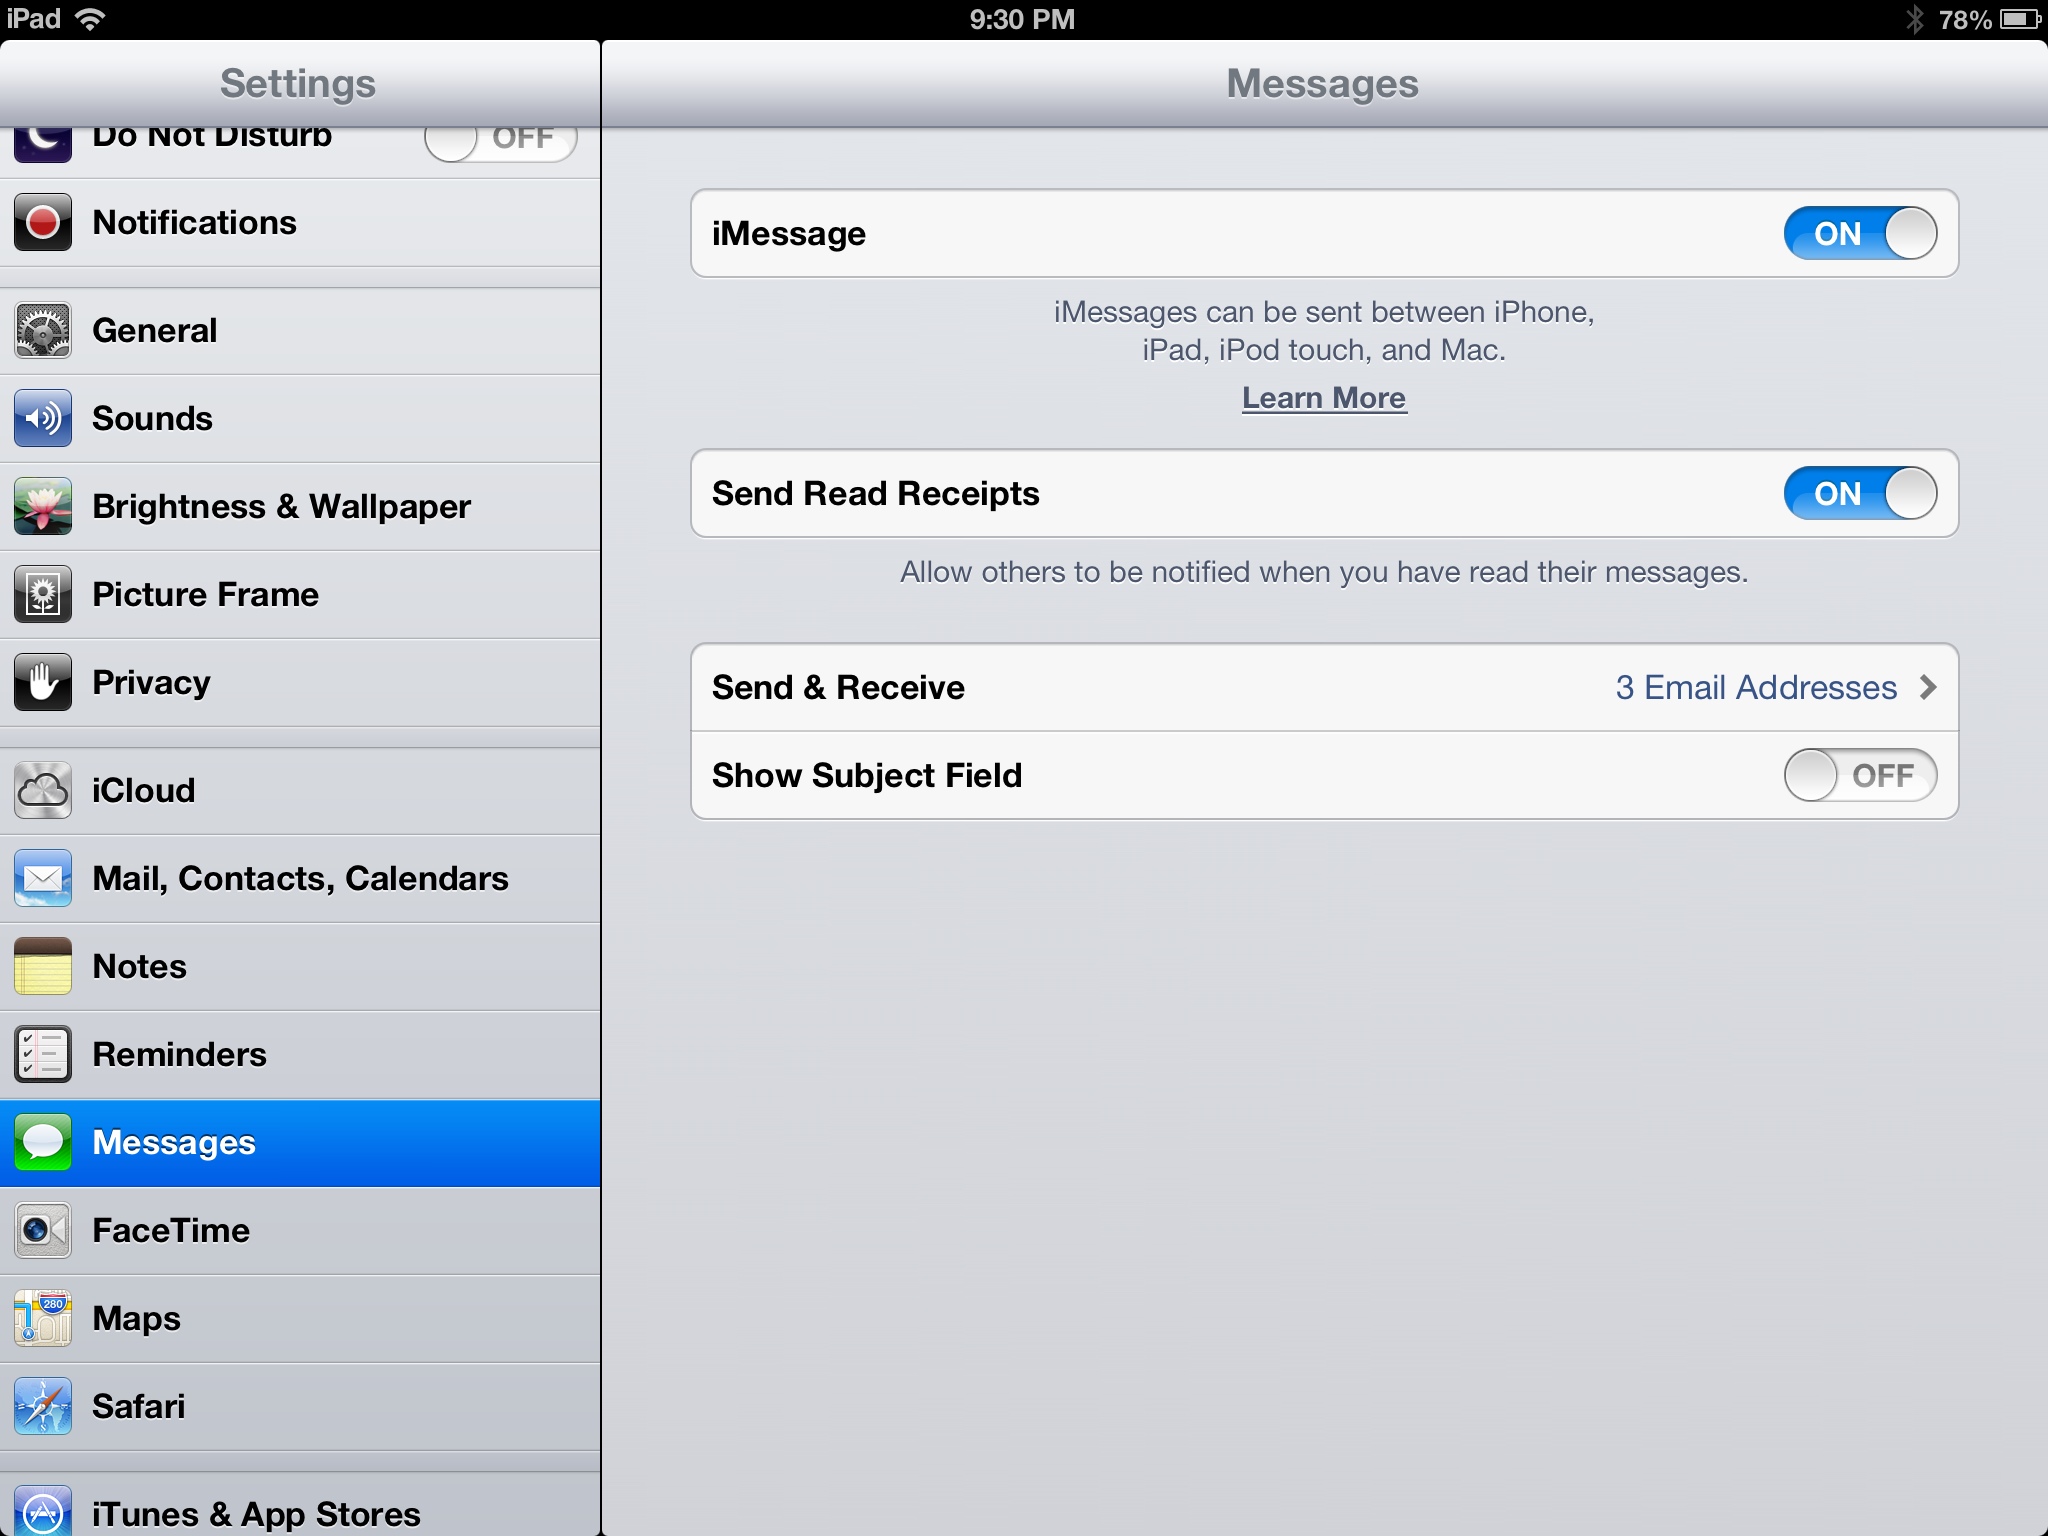 Turn off iMessage Before Switching away from iOS